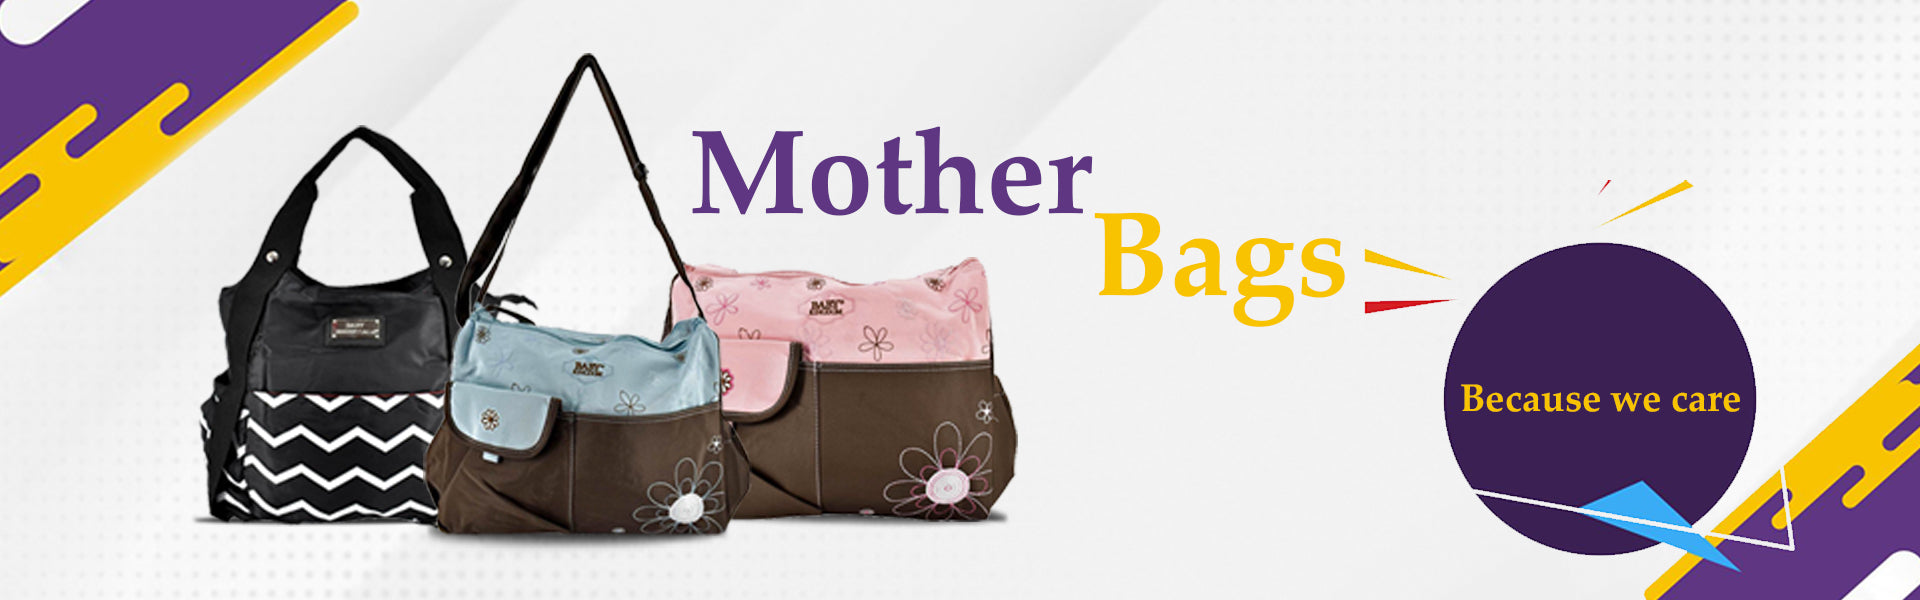 Mother Bags